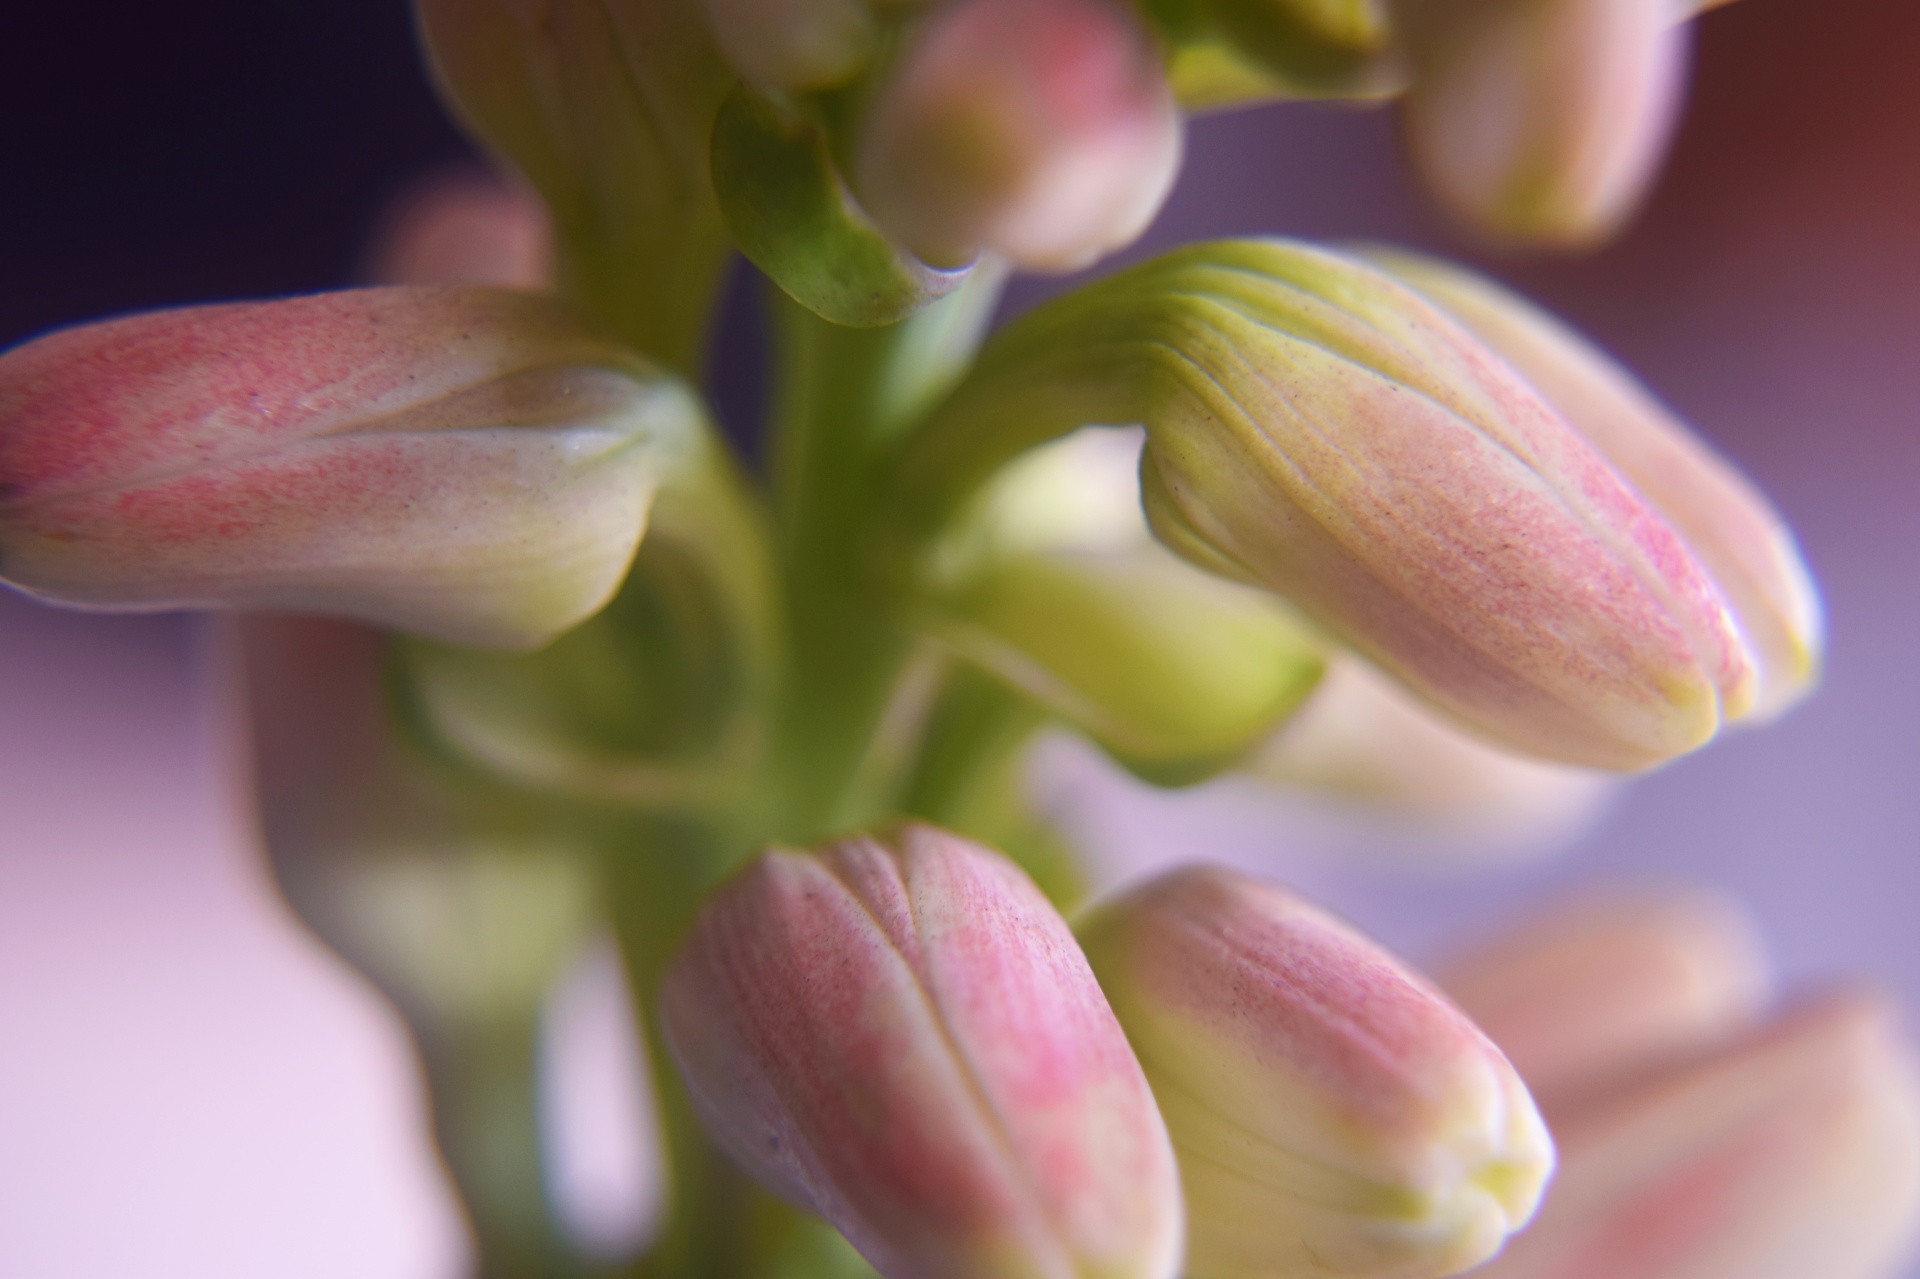 polianthes flower buds free photo